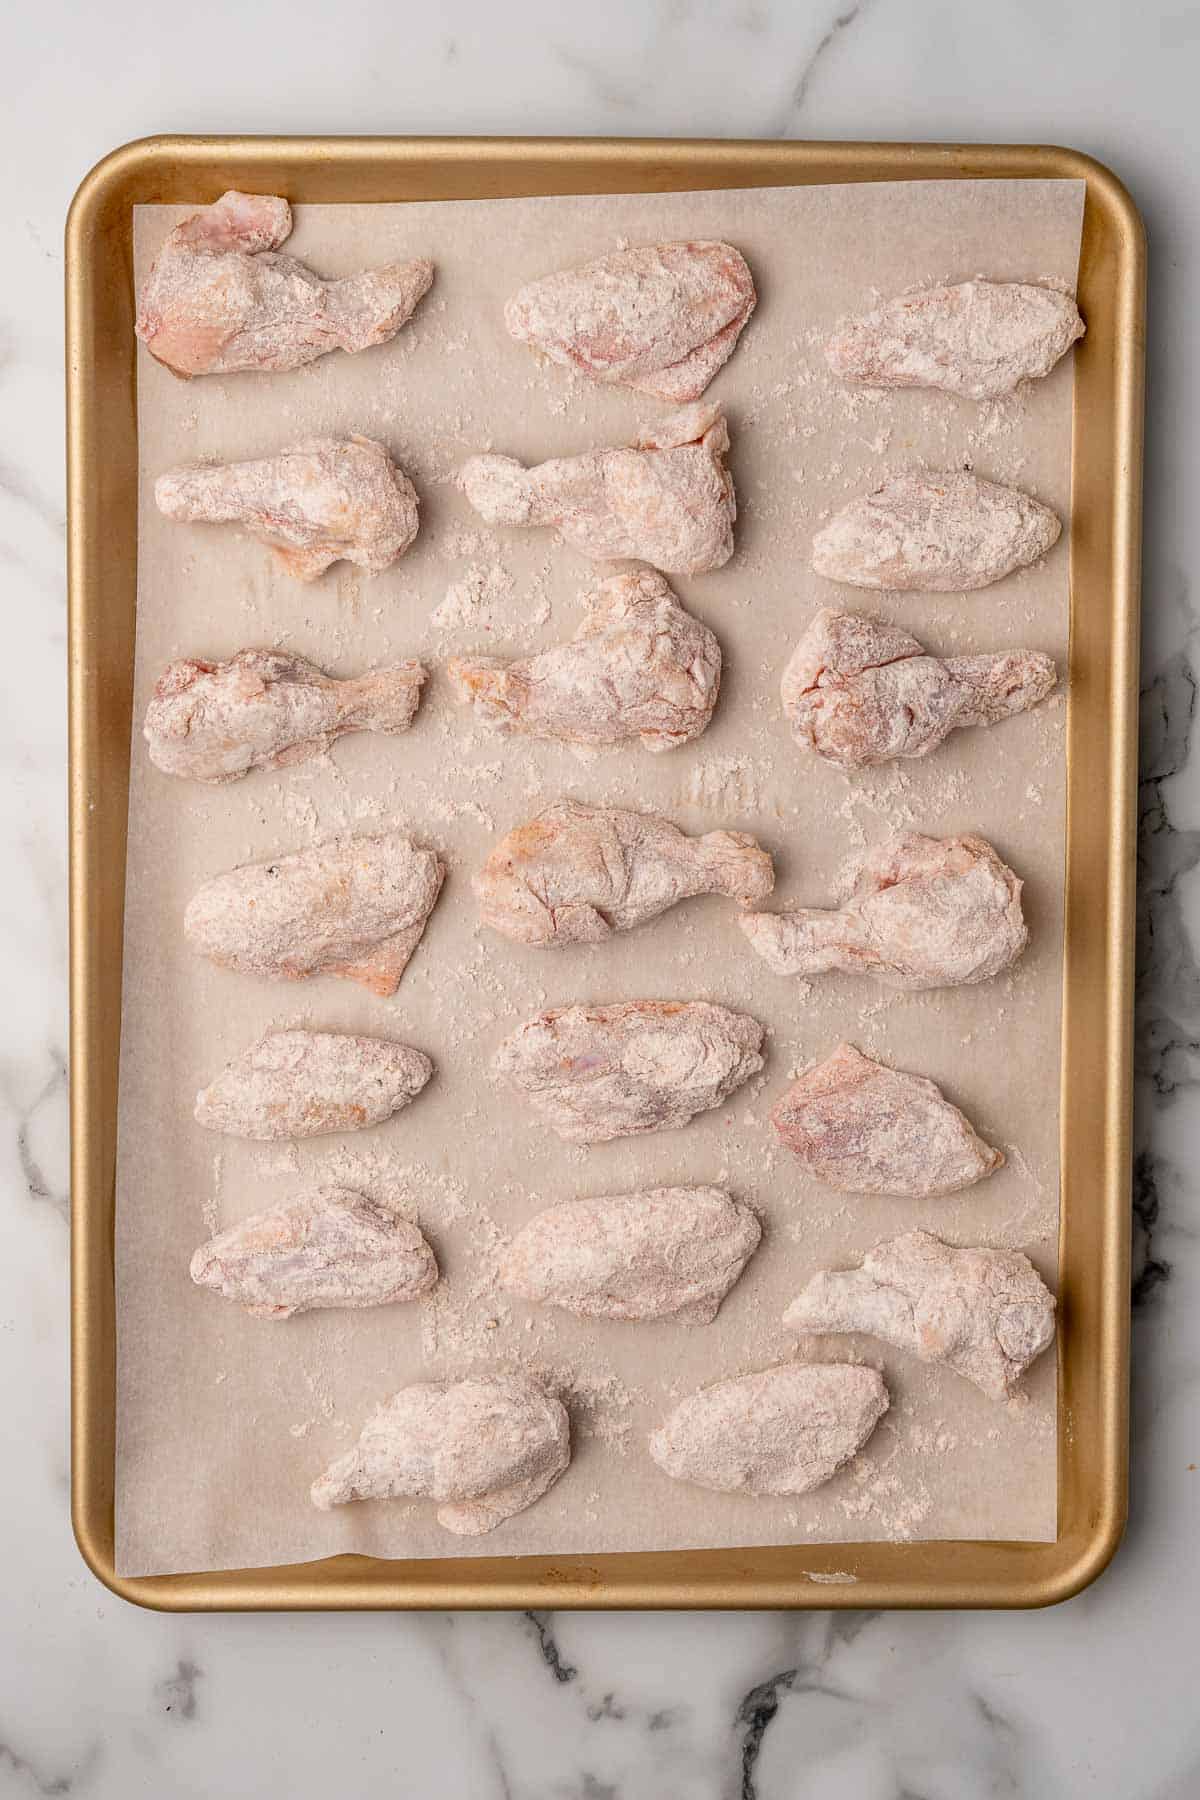 Wings coated in flour and spices on a baking sheet